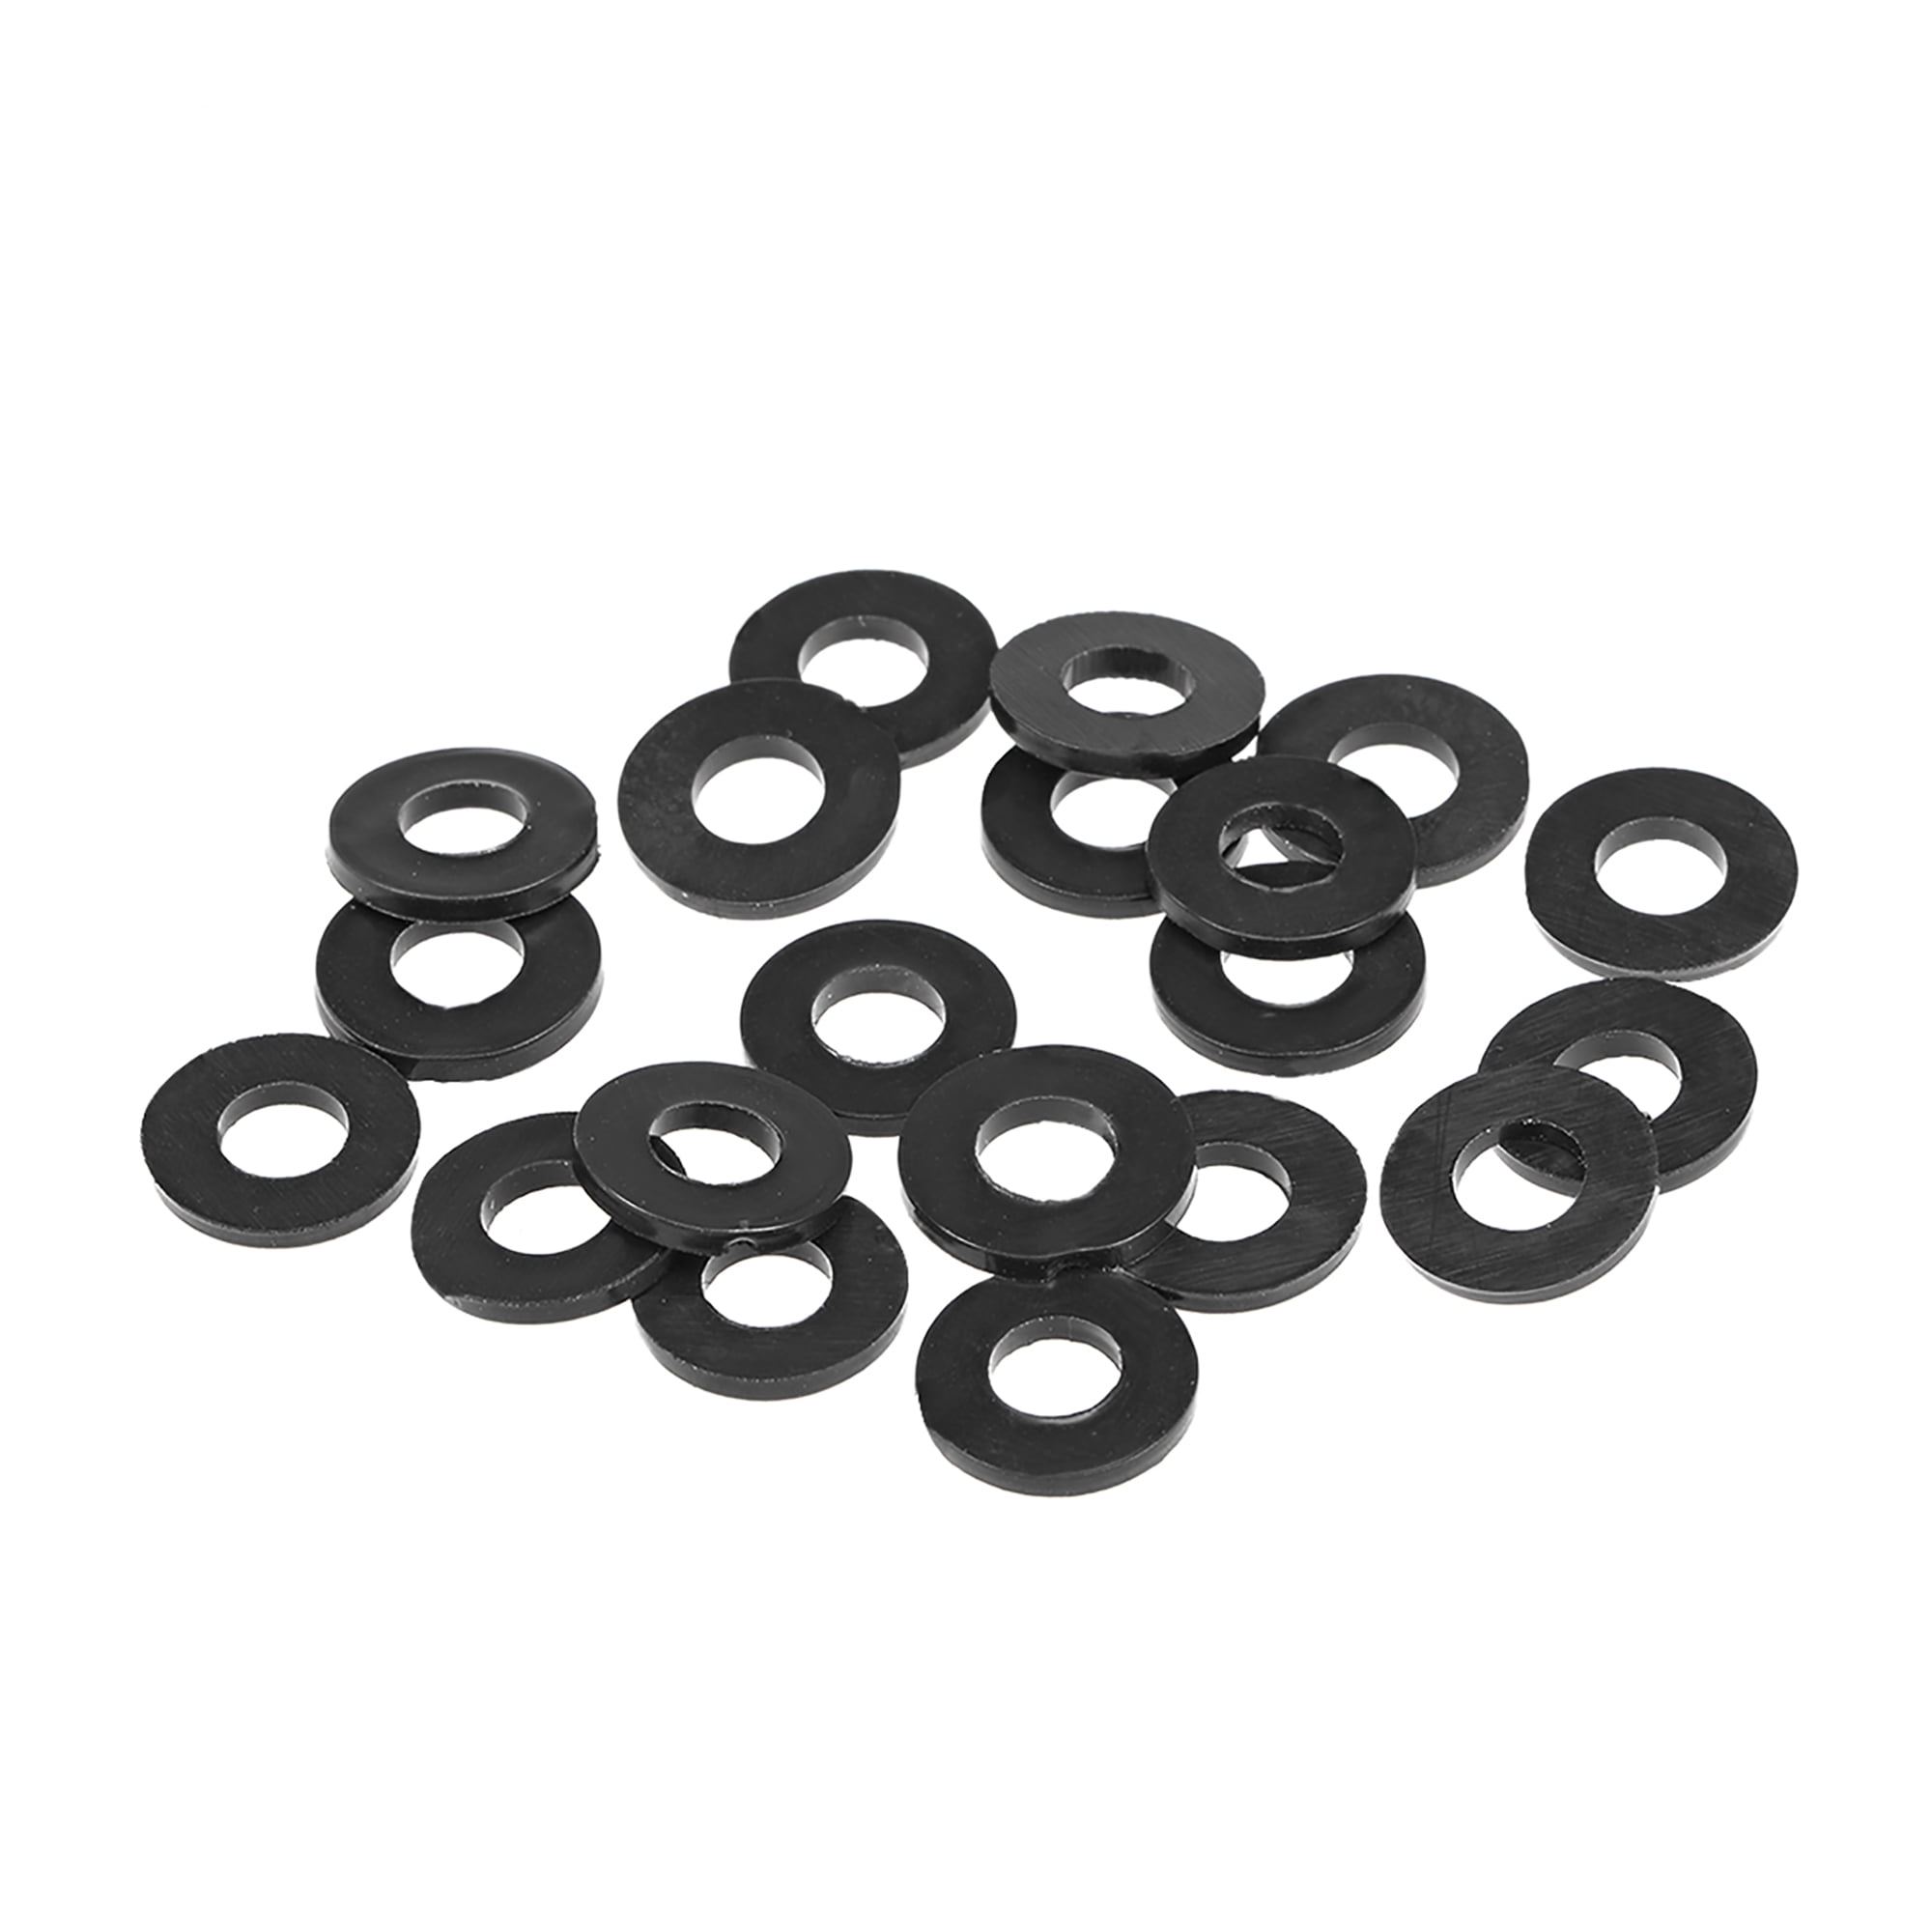 Inner Dia: M2x36mmx1mm WSHR-73832 15pcs M2 Ultra-Thin Flat Washers Gaskets Aluminum Washer Gasket 36mm-38mm Outer Dia 0.1mm-1mm Thickness